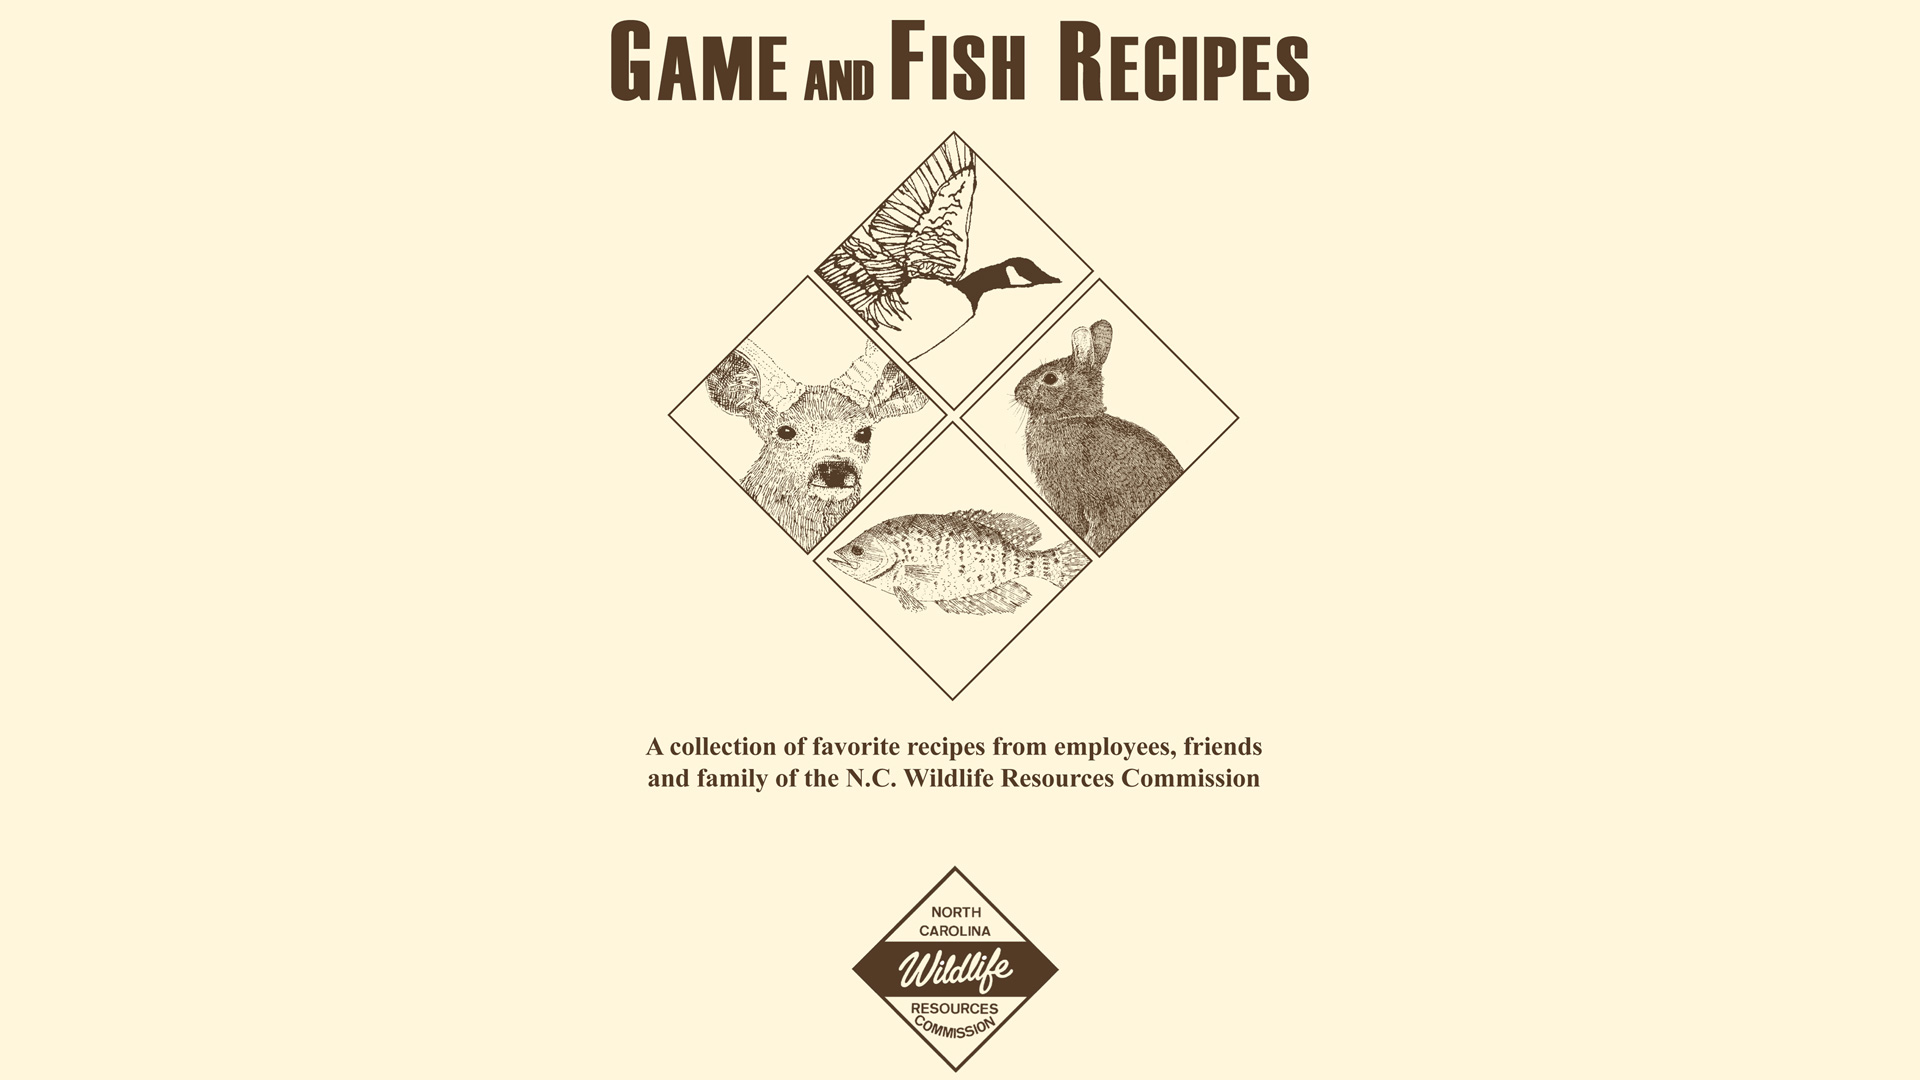 A collection of favorite recipes from employees, friends and family of the N.C. Wildlife Resources Commission